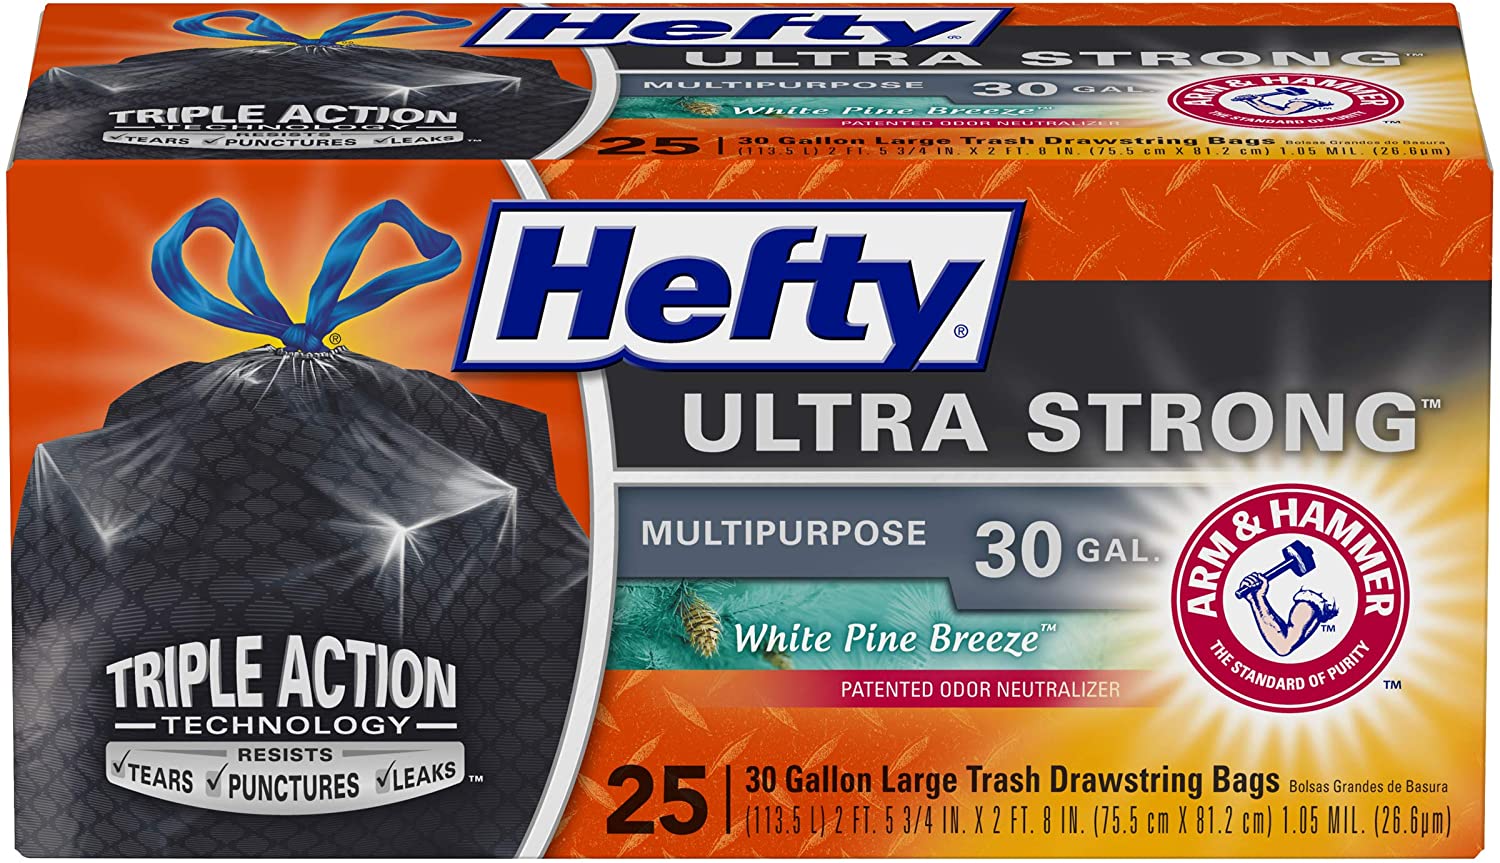 Hefty Ultra Strong 30-Gallon Trash Bags 25-Count For Only $5 Shipped on Amazon